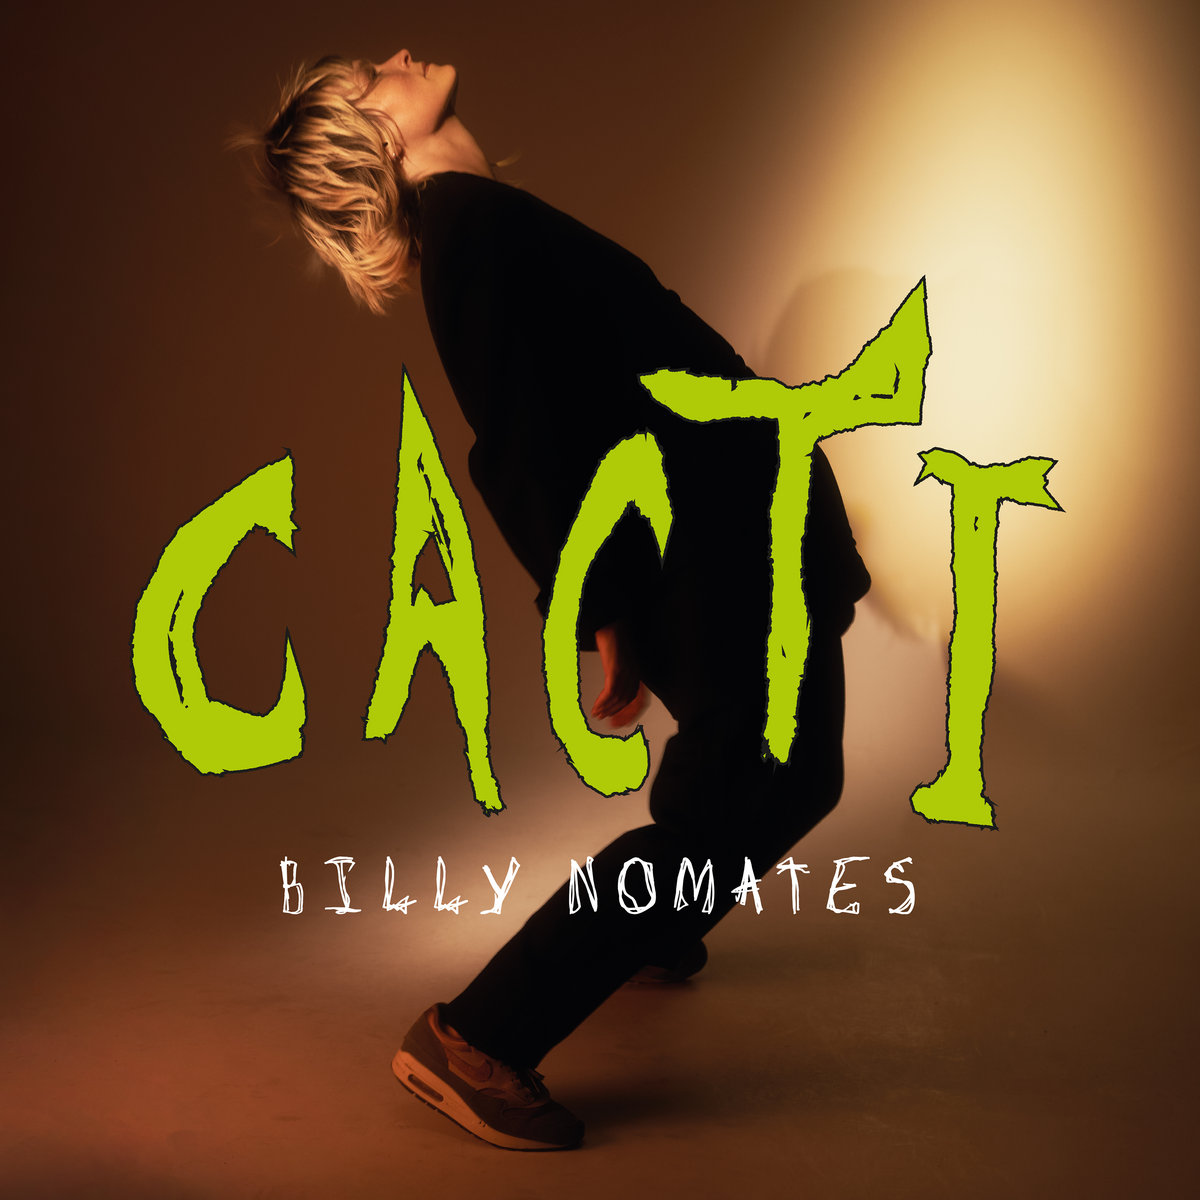 ijs periscoop getrouwd CACTI | Billy Nomates / Tor